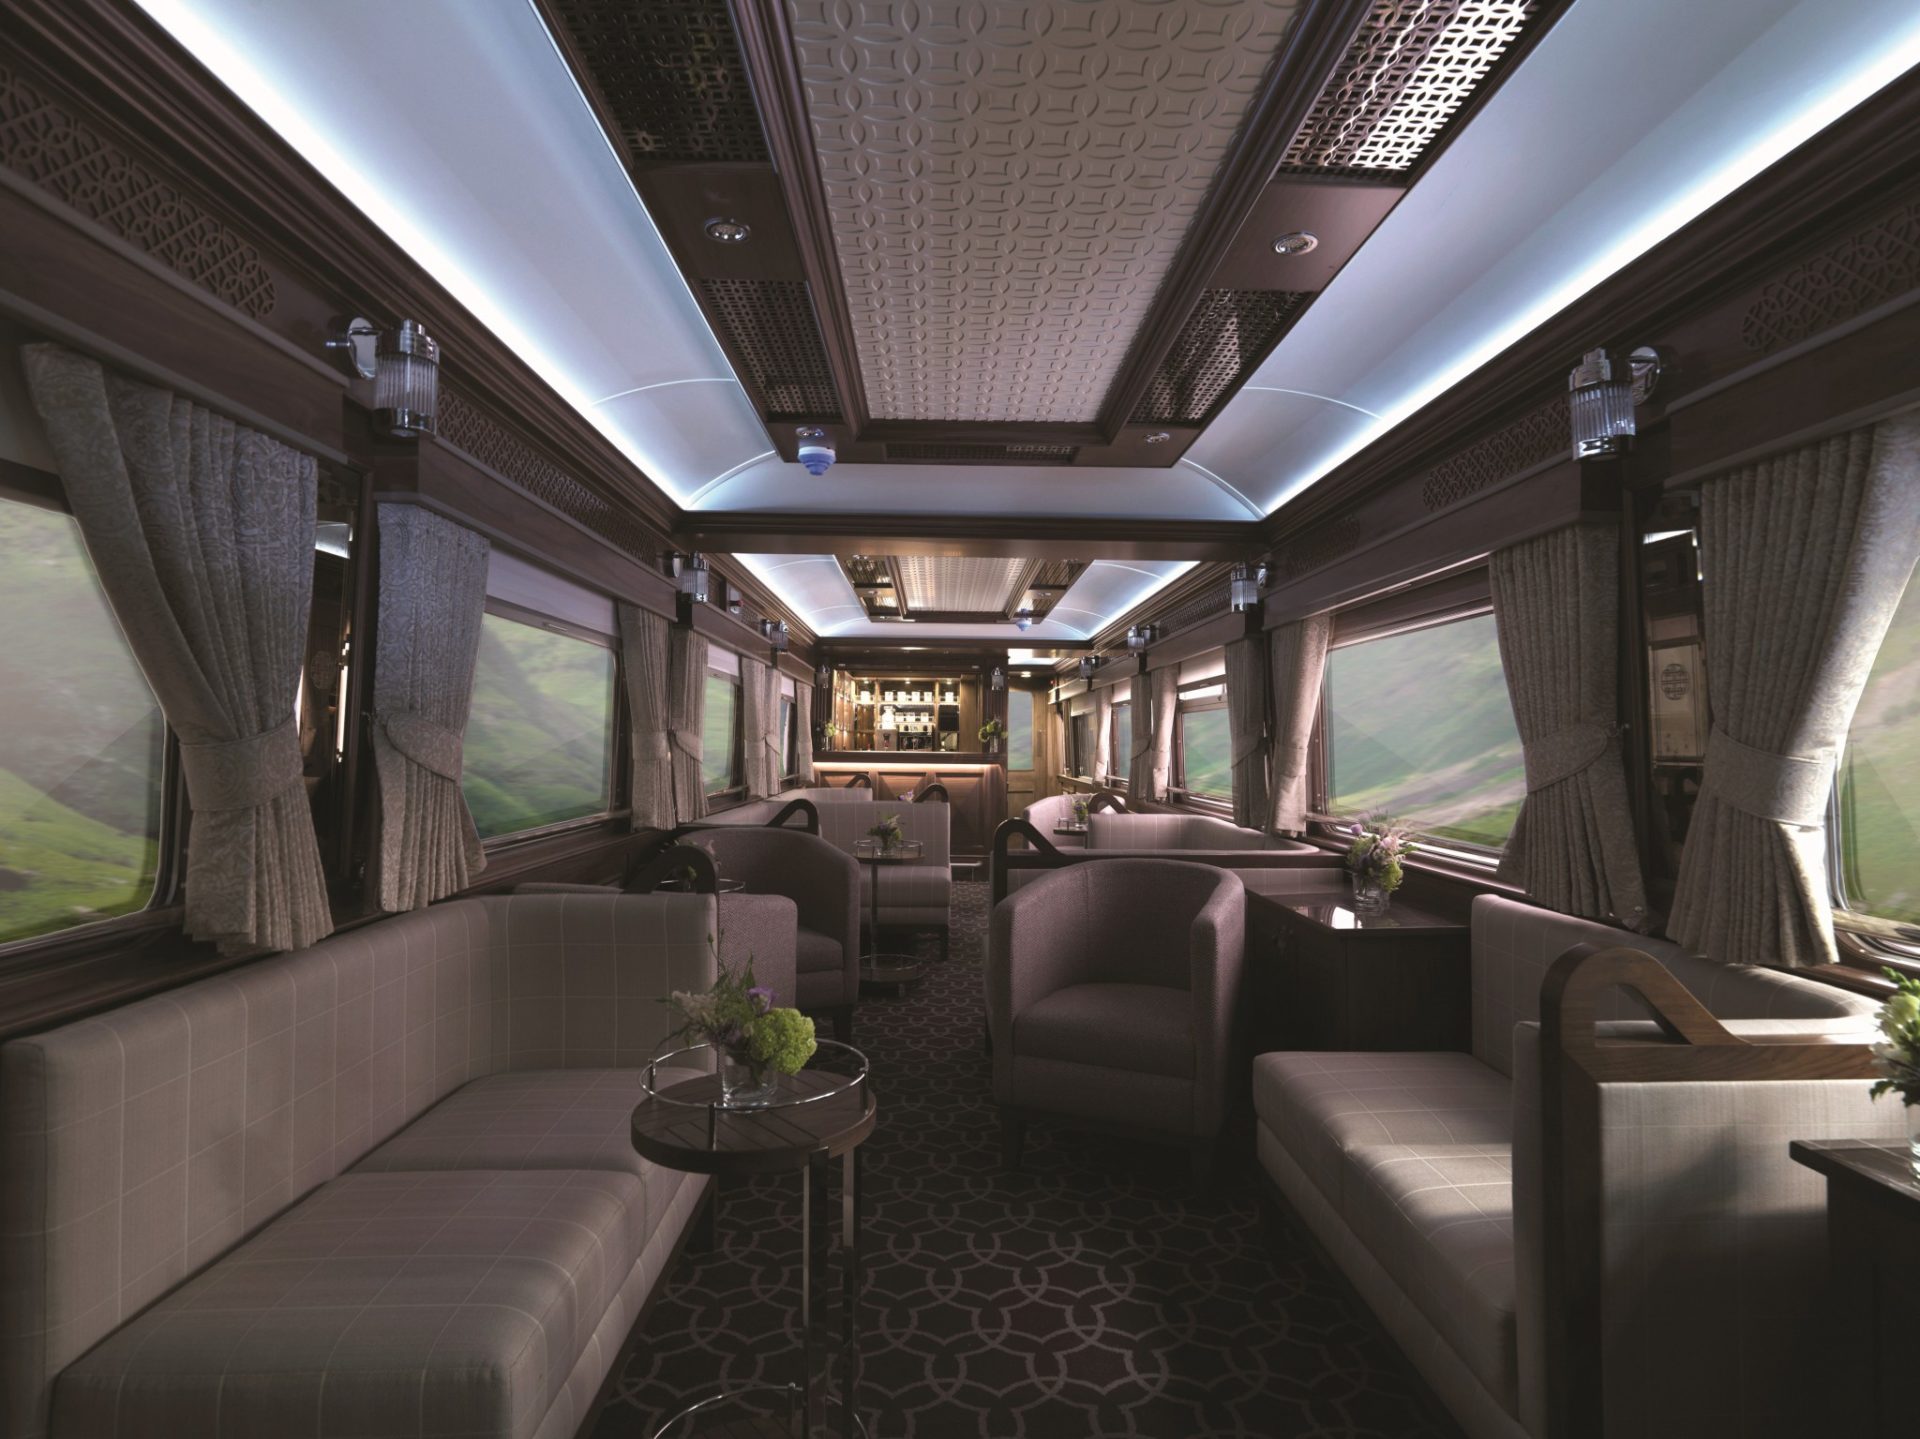 Mivan completes £2.5m fit-out luxury rail carriages